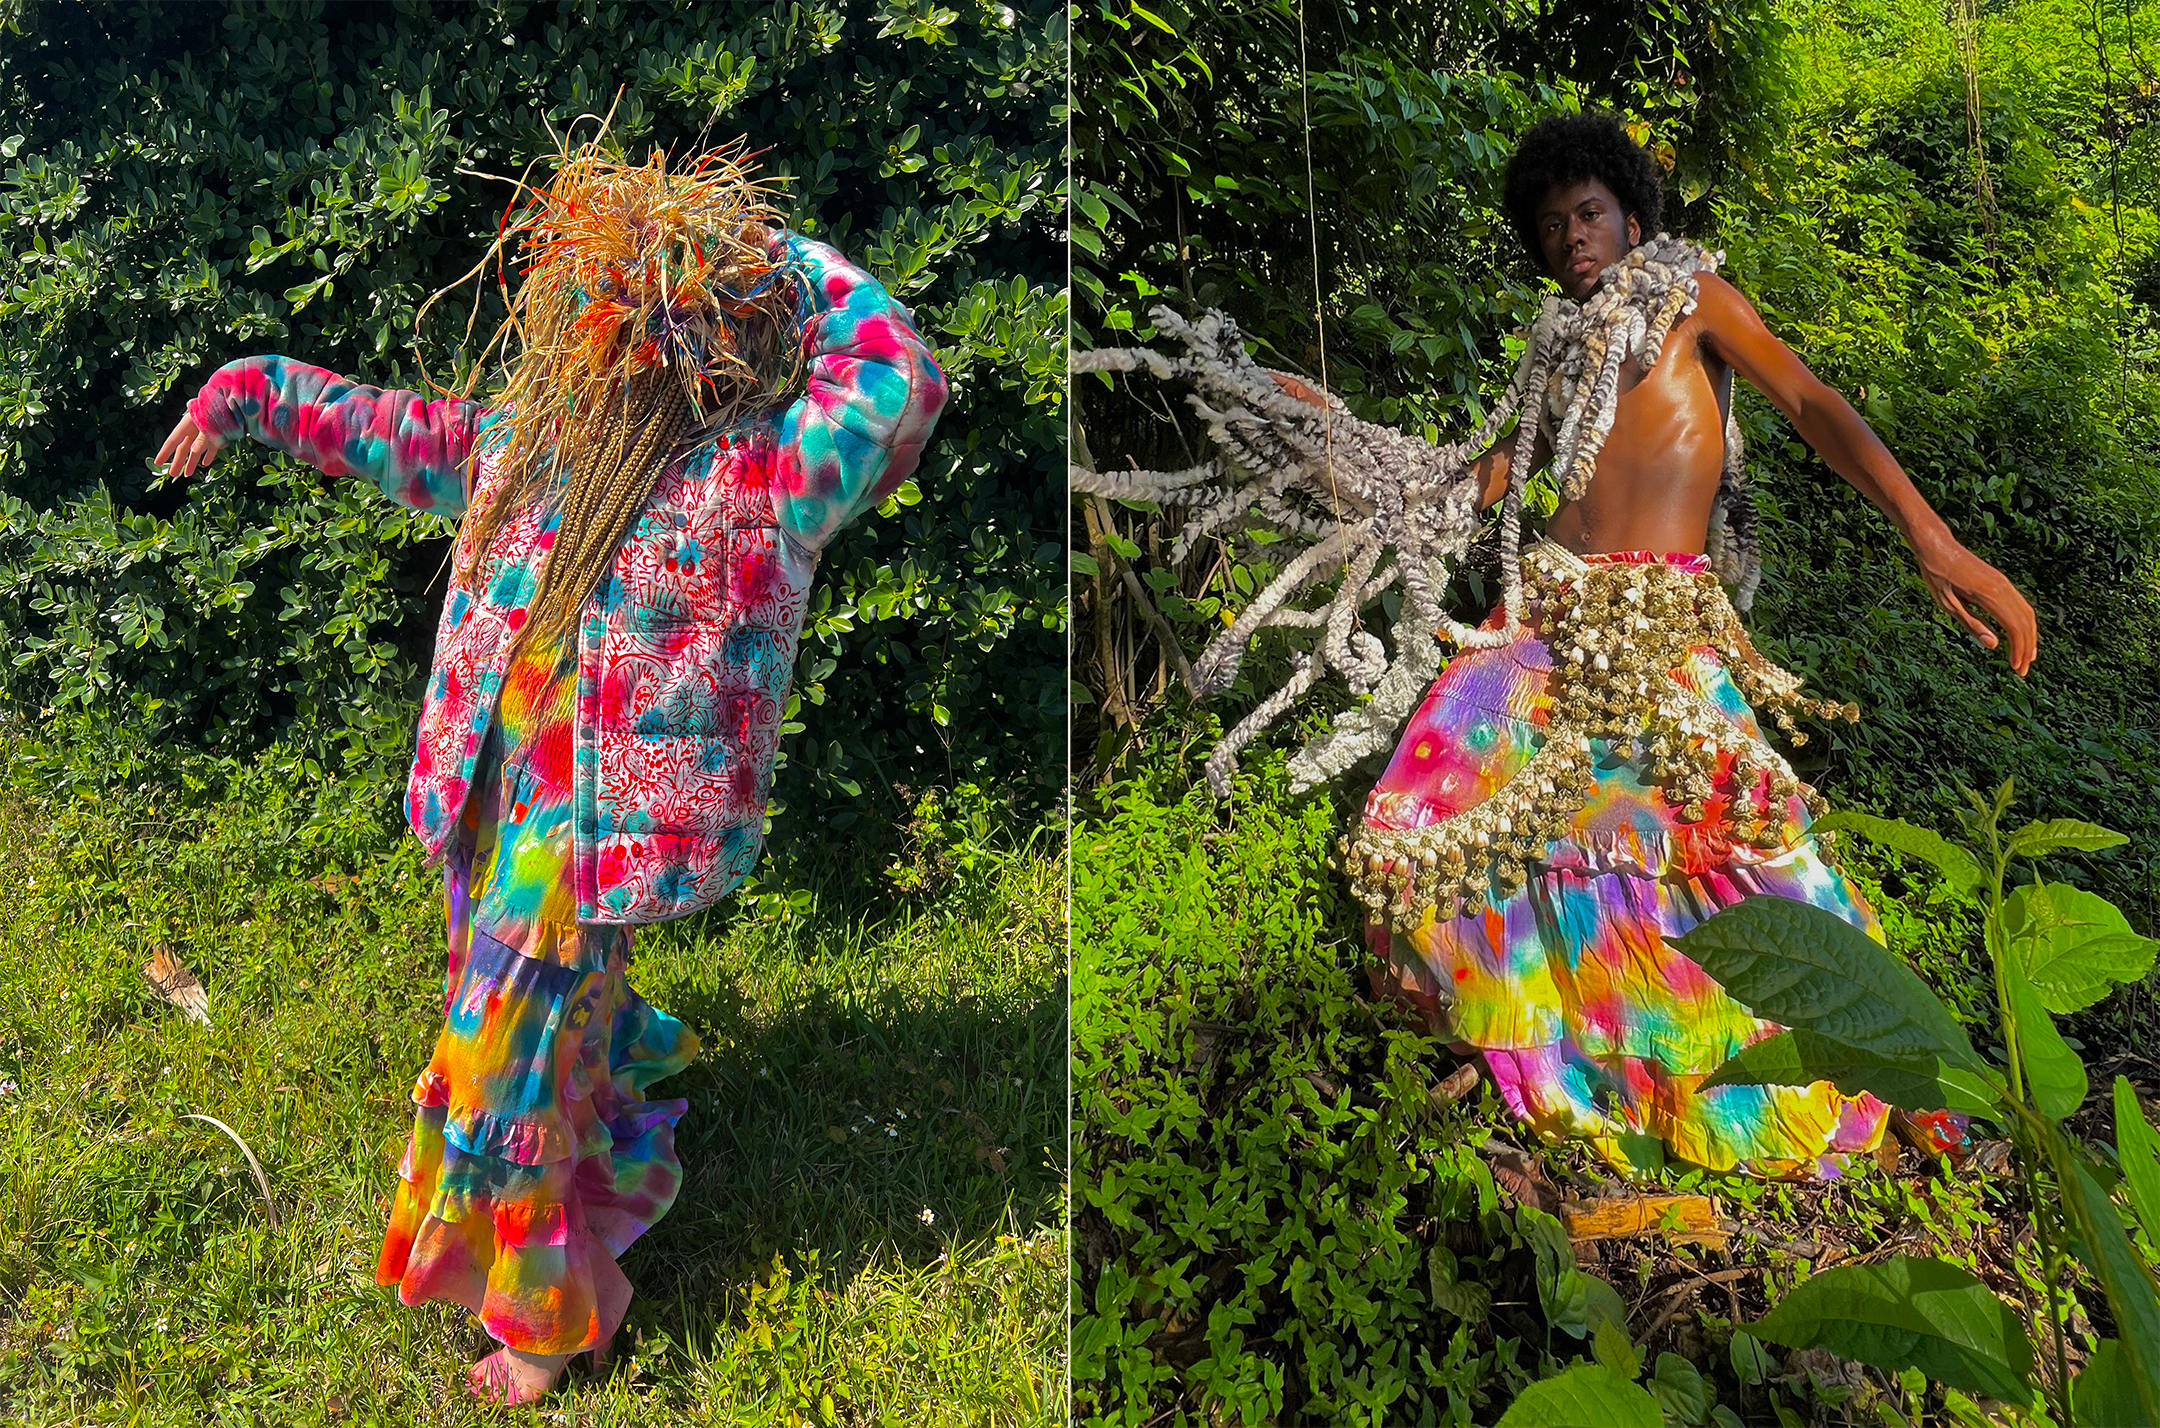 two photos, side by side, of a young man wearing a colorful, tropical-like costume of a floral skirt and similarly styled coat and a grass mask, on the left, and the just the skirt on the right